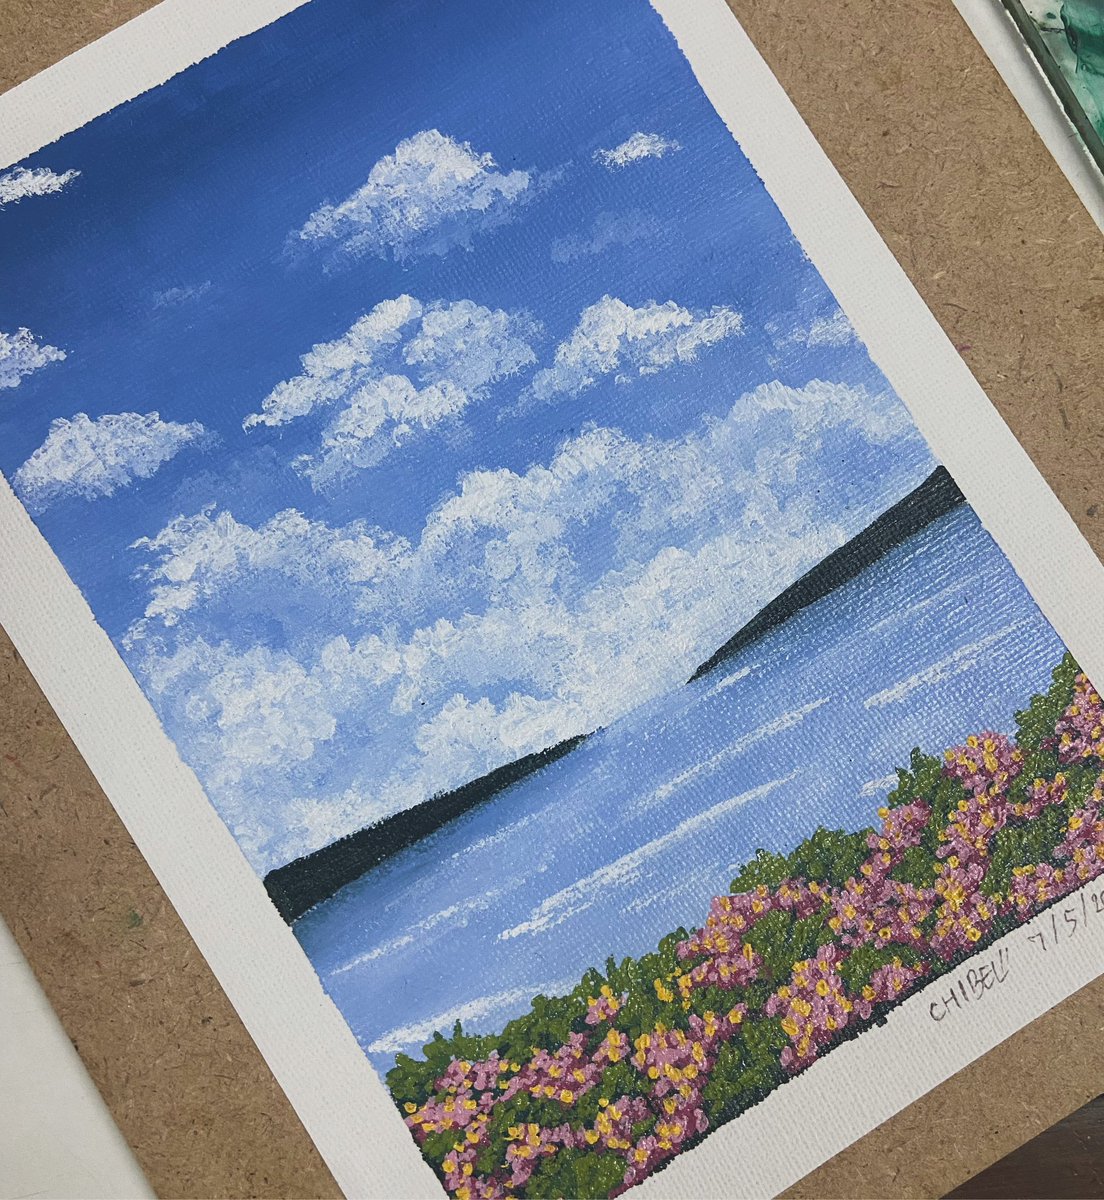 Sea & pink flowers 🌸🏖️

color : Acrylic 
Paper : canvas pad A5

#chibelxlittlecraft #acrylicpainting #acrylic #acrylicart #canvaspad #canvaspainting #canvasart #landscape #landscapes #landscapeart